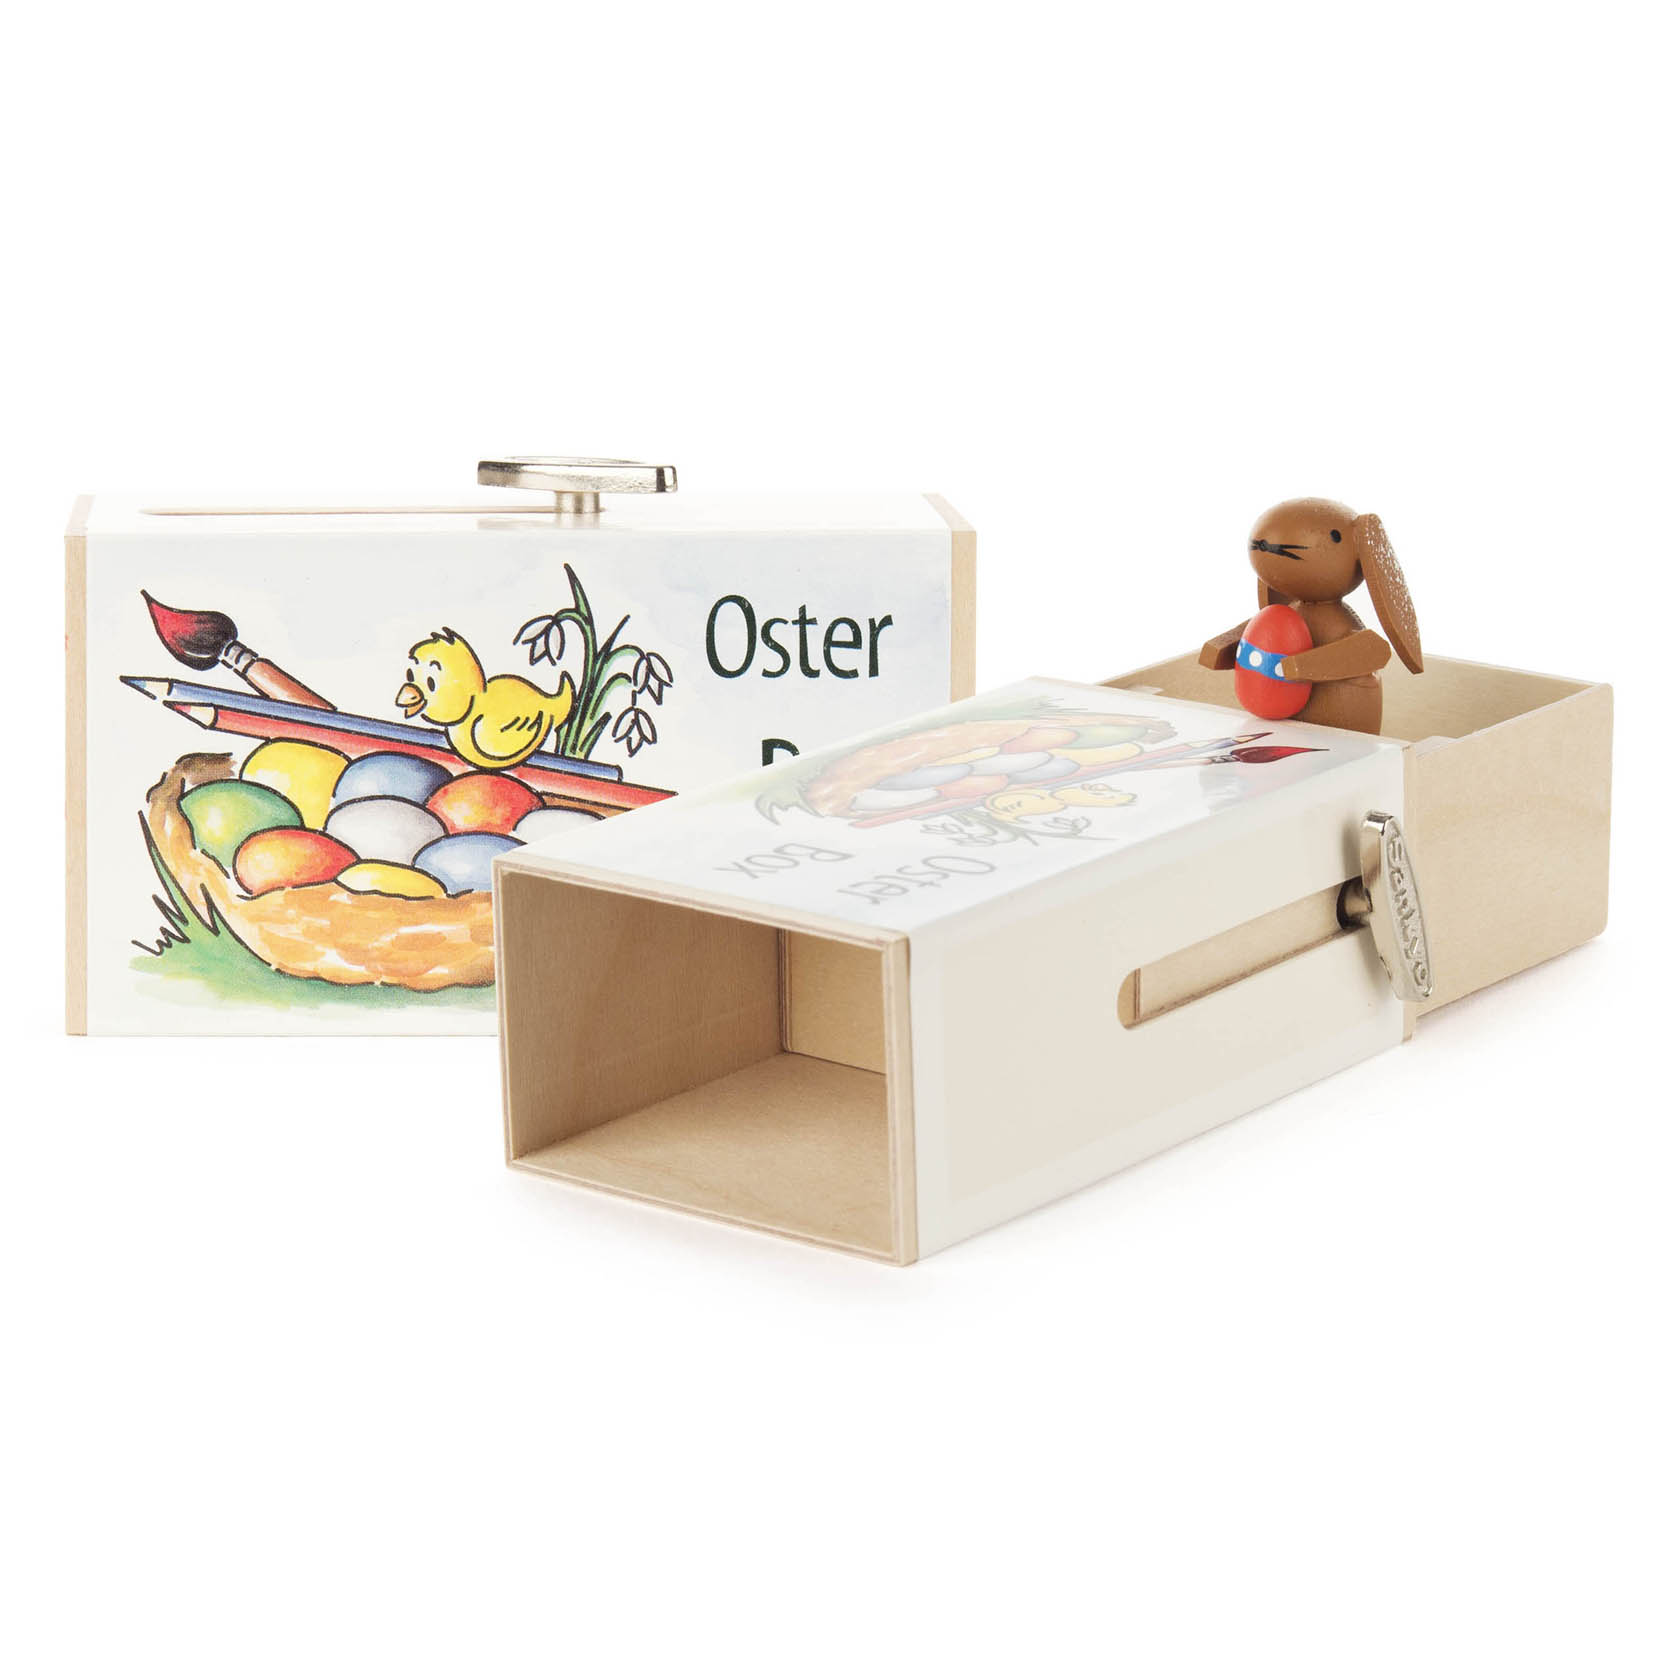 Schiebebox "Oster-Box" mit Hase Melodie: Osterparade